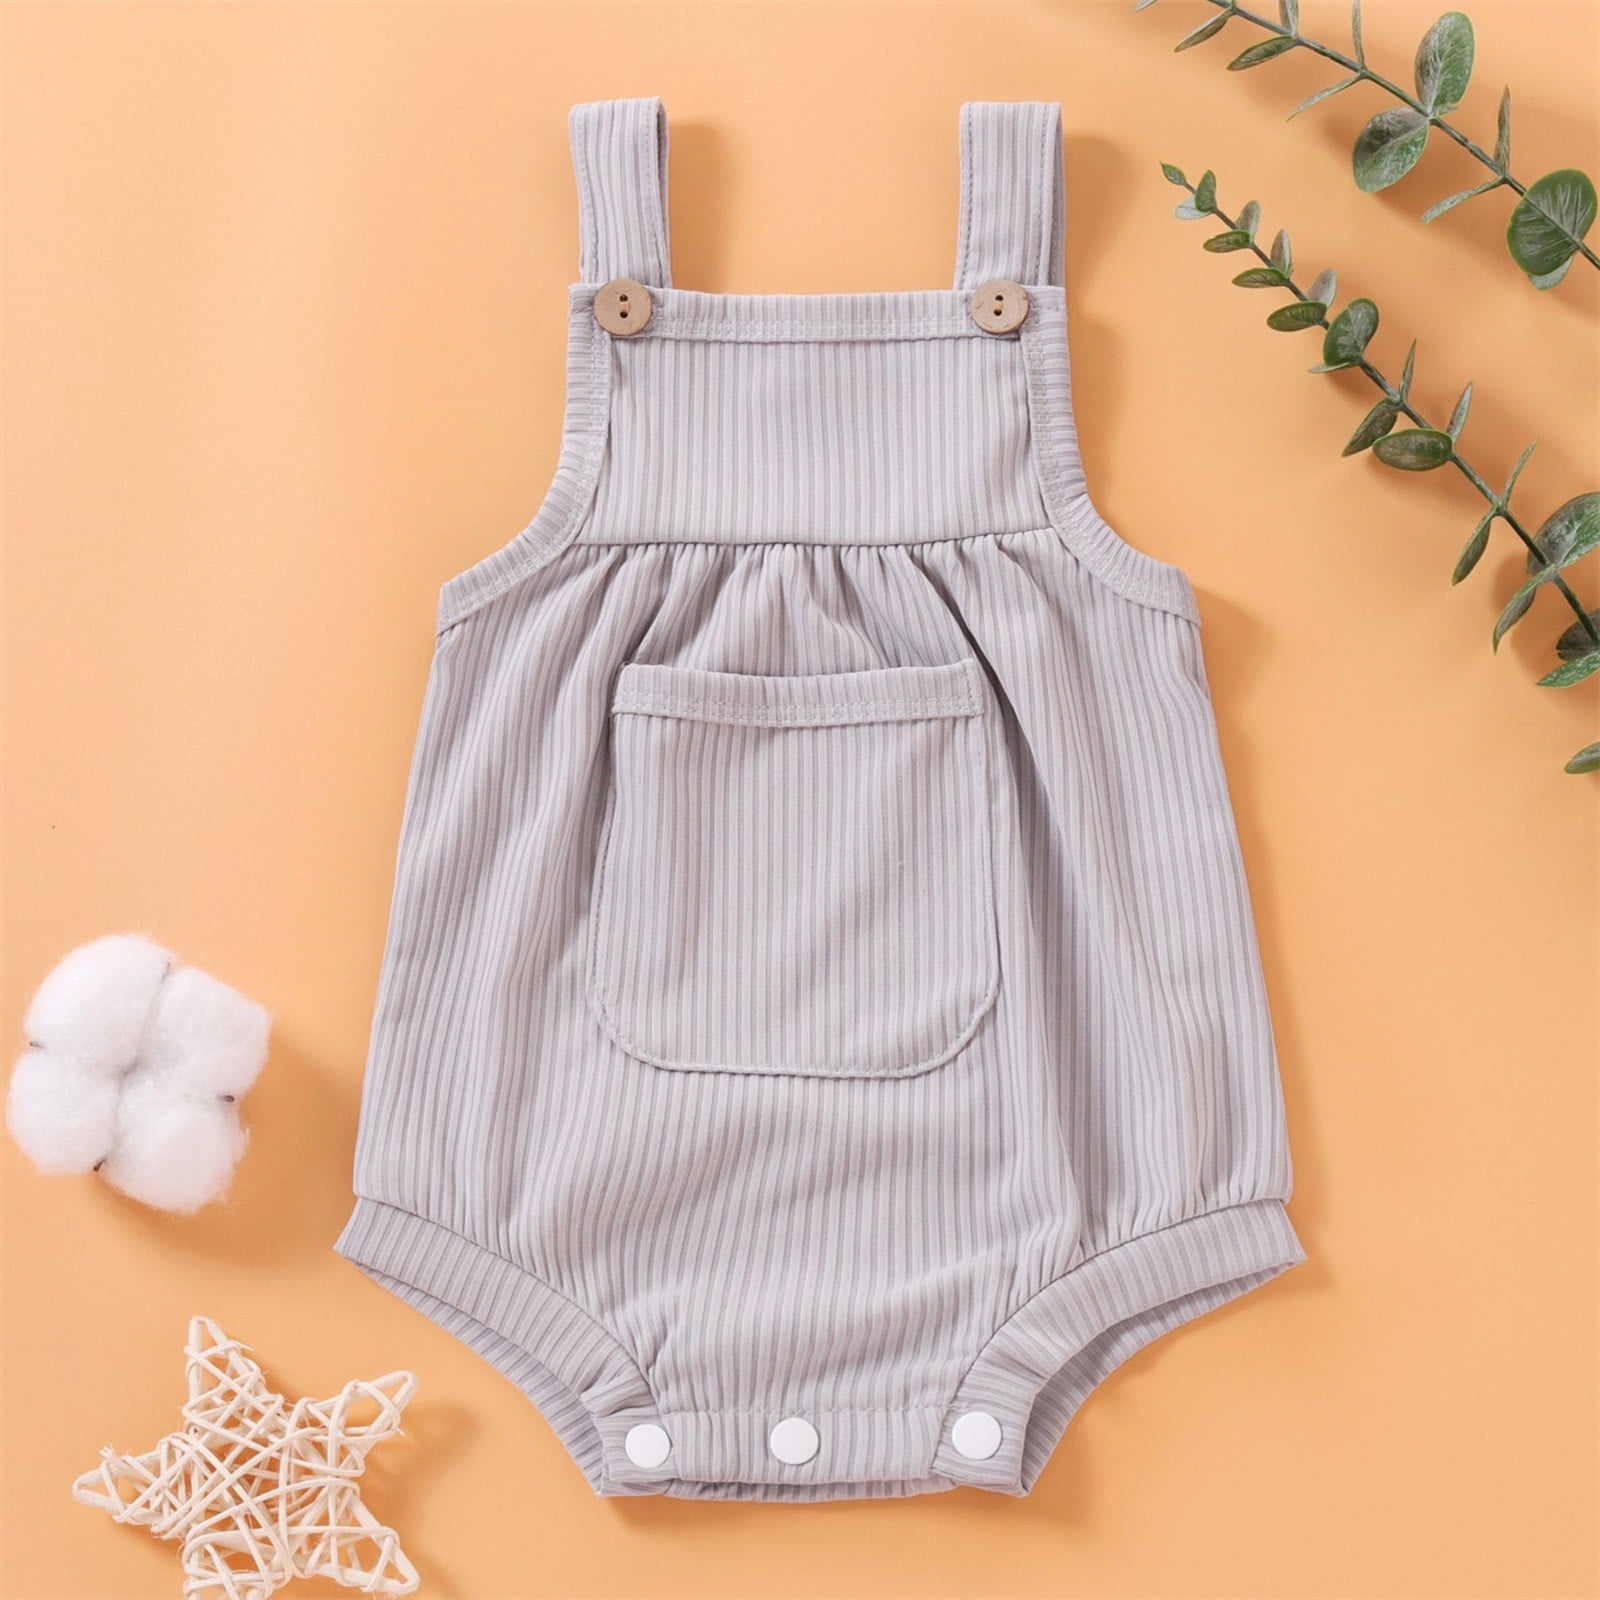 HOMEMAXS Bodysuit Extender Universal Soft Jumpsuit Extend Film for Baby  Boys Girls Infants Toddlers Clothes 